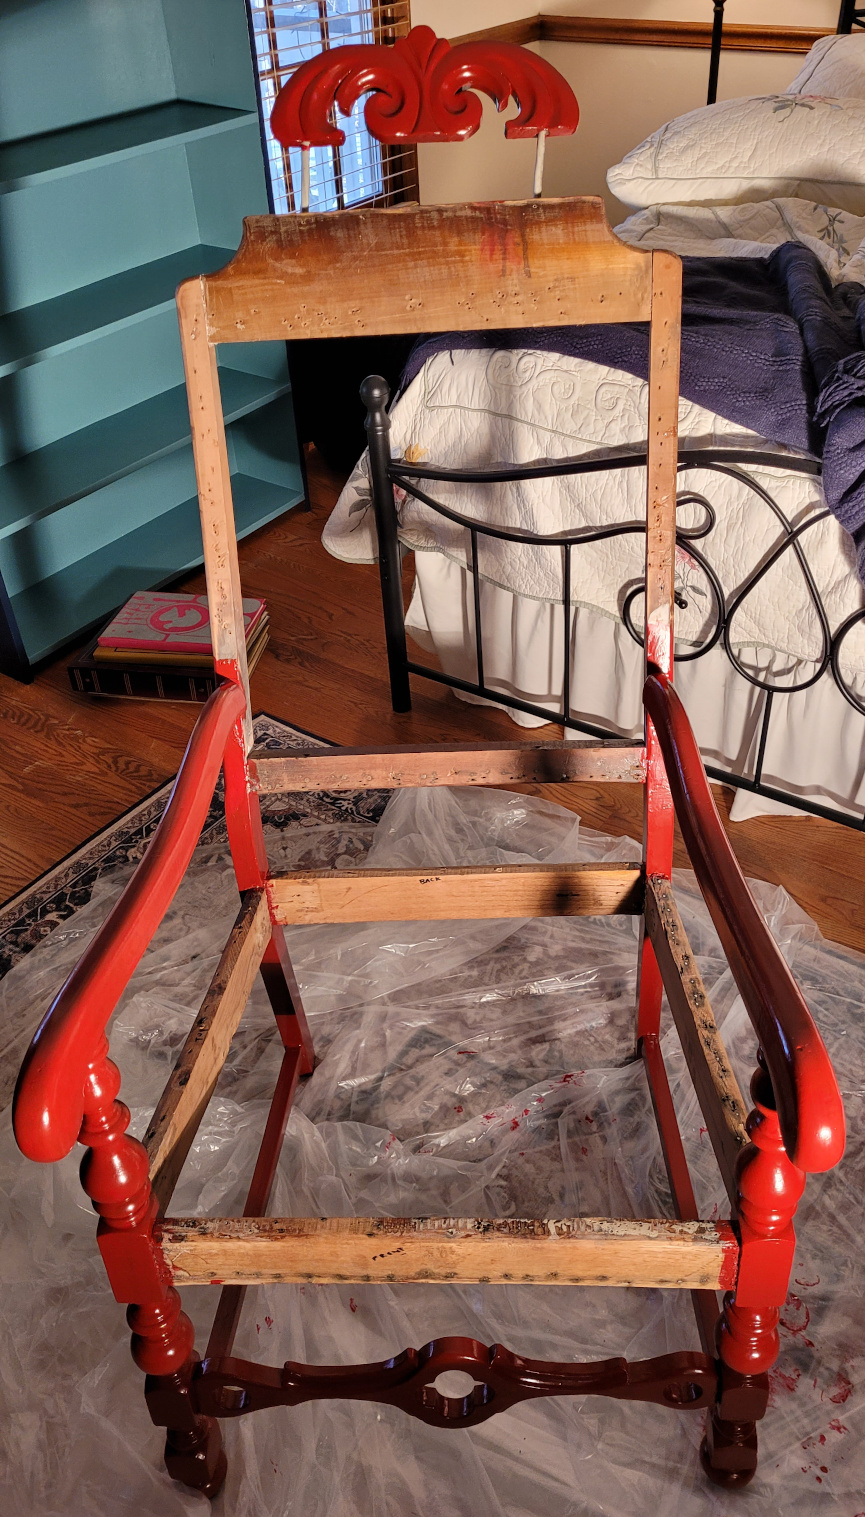 Chair frame, painted red